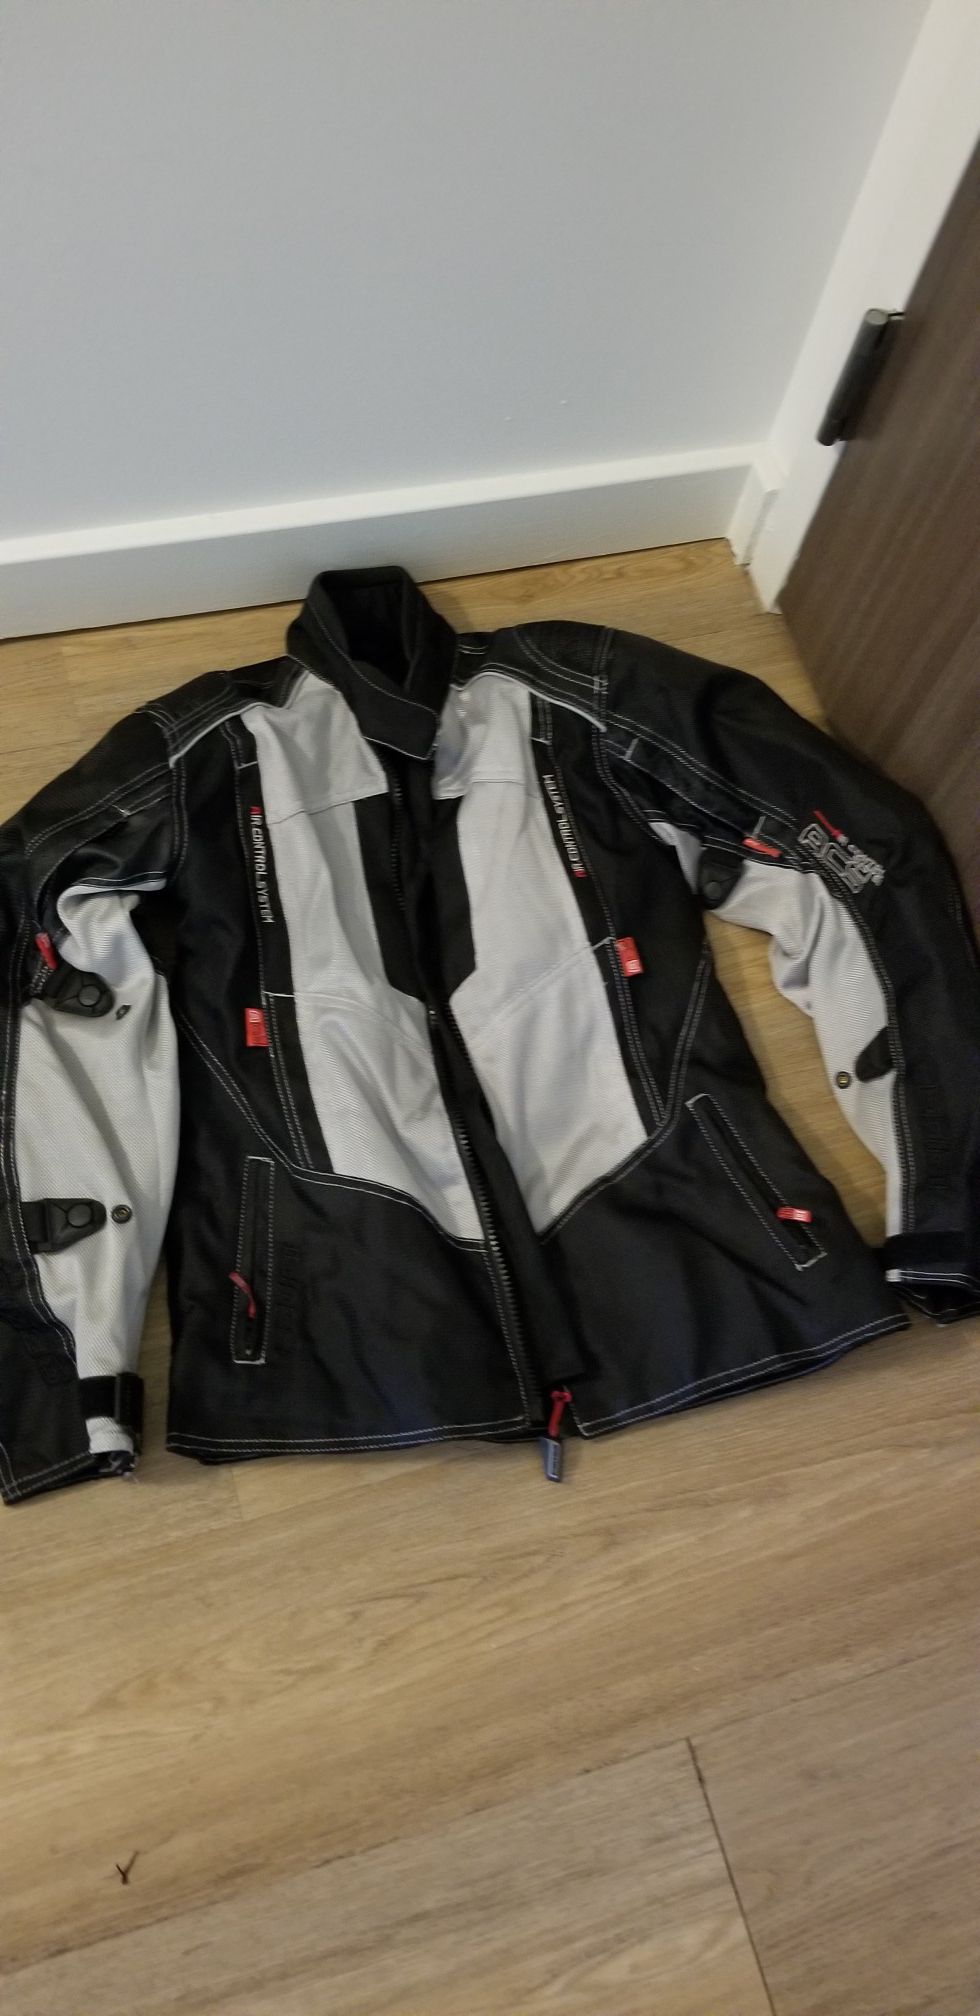 Motorcycle riding jacket and Reflective vest